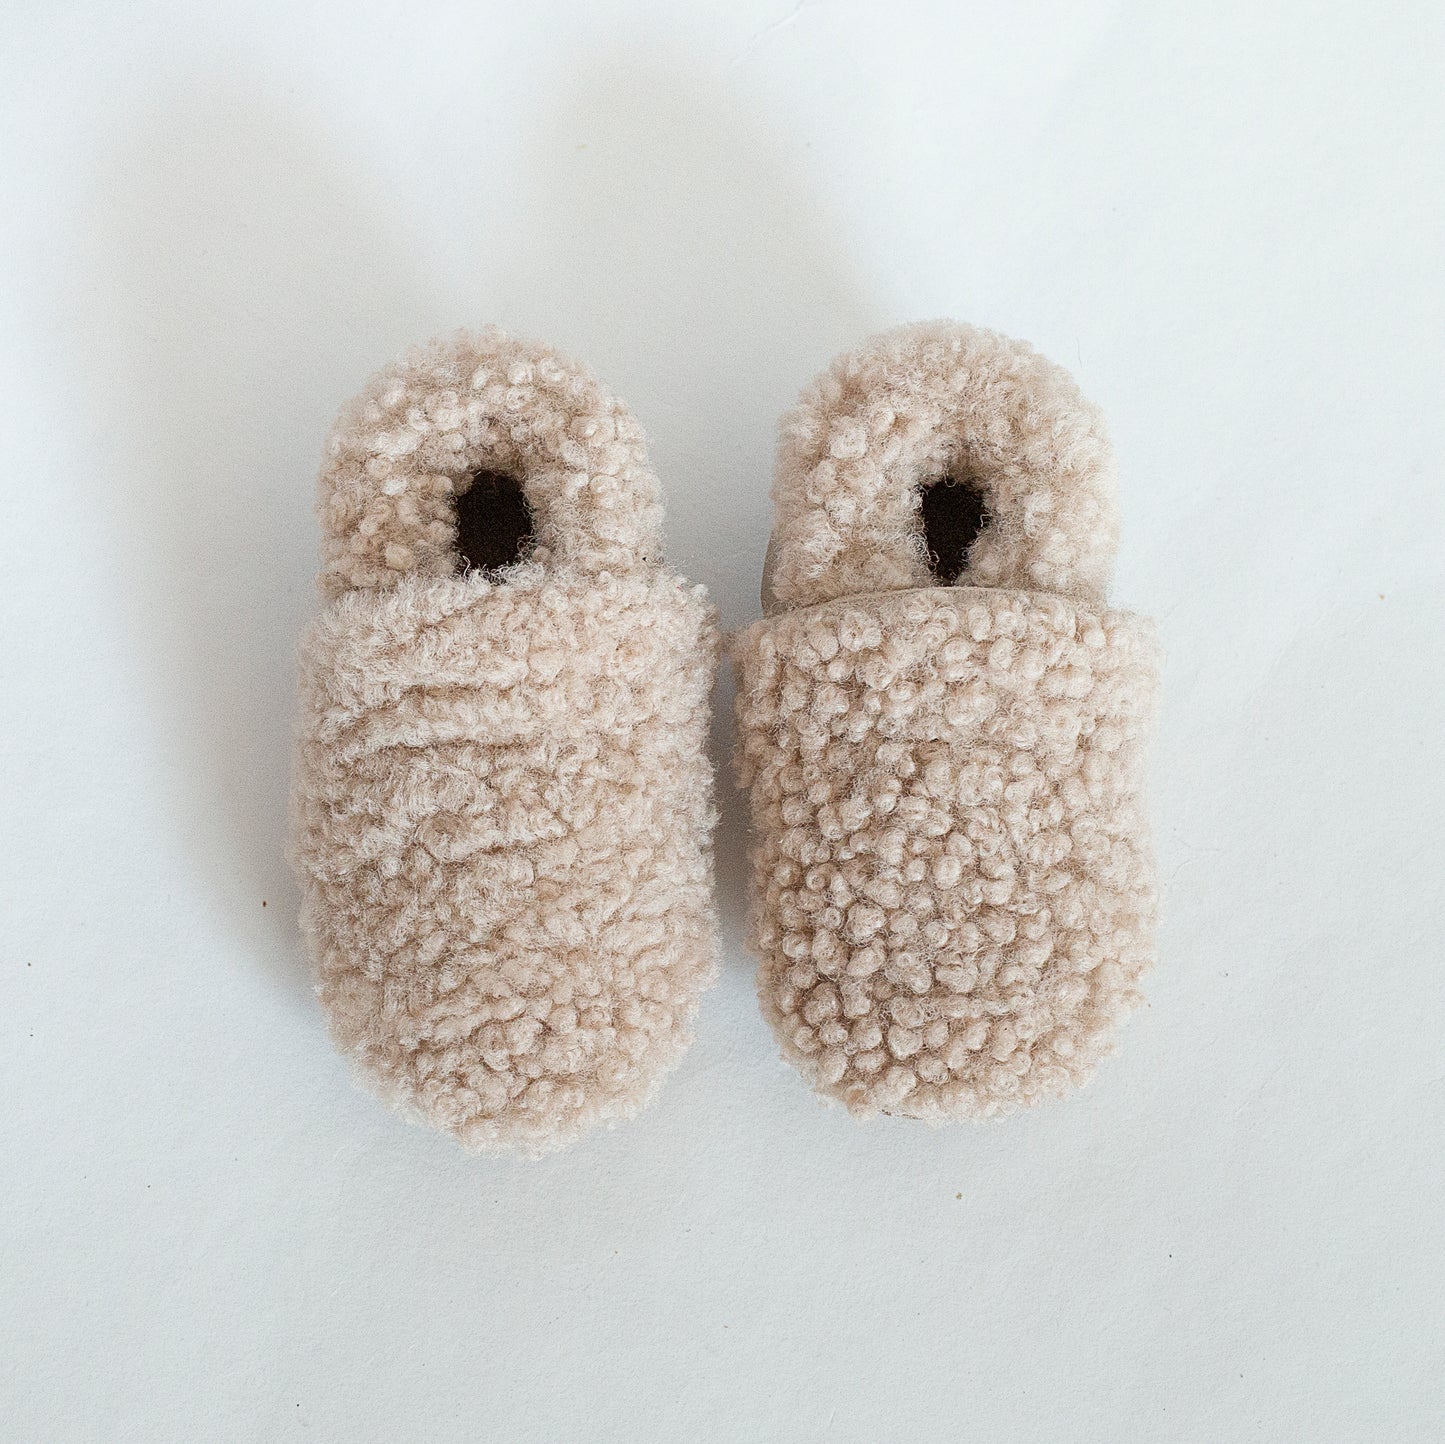 Winter Baby Shoes, Genuine Italian Leather and Fur